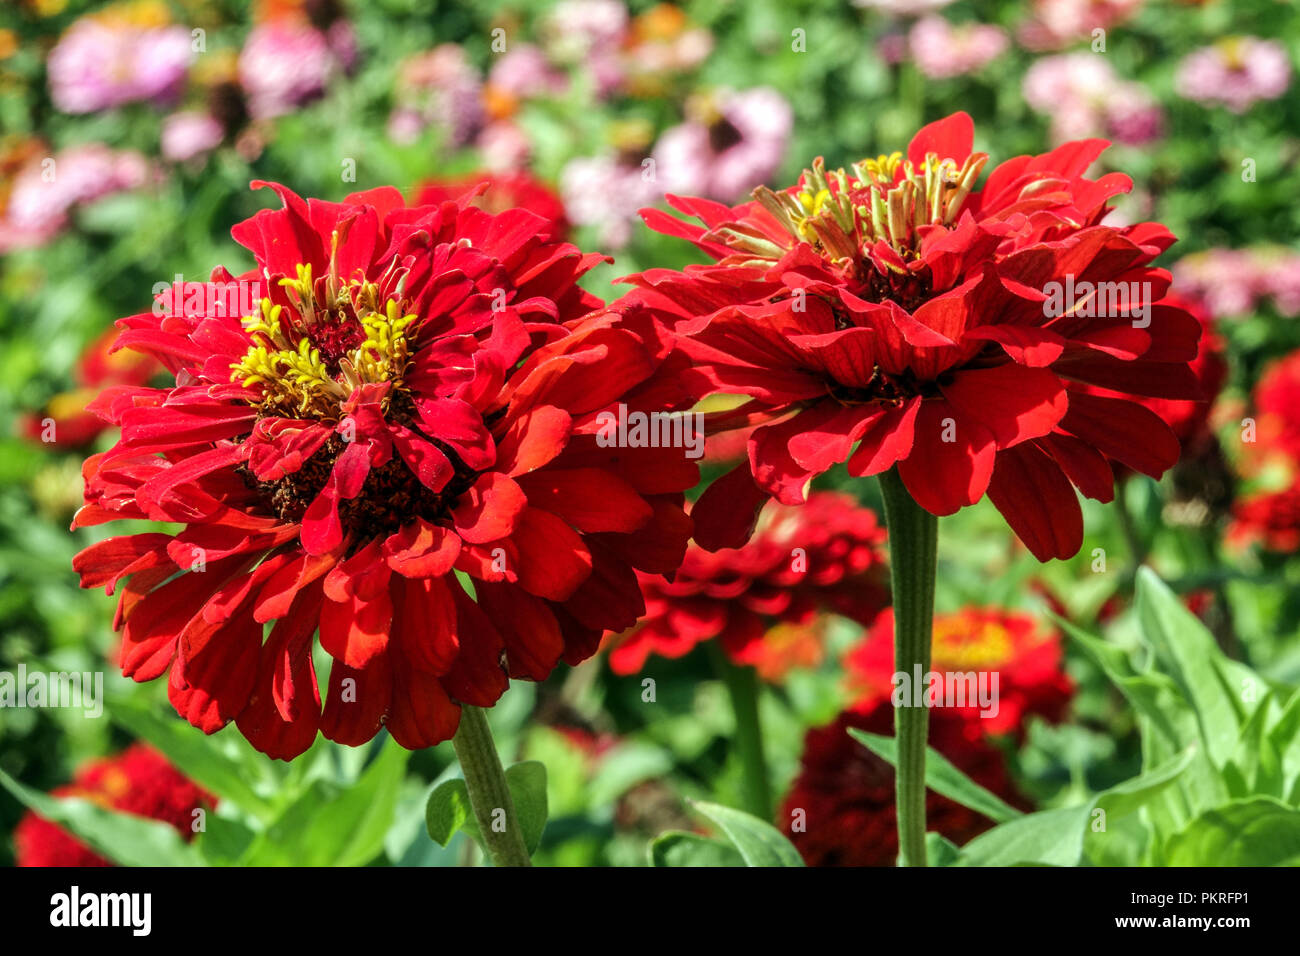 Red Zinnias flower Zinnias flowers Red Zinnia 'Scarlet Flame' Red Zinnias flowers Annual garden plants Stock Photo